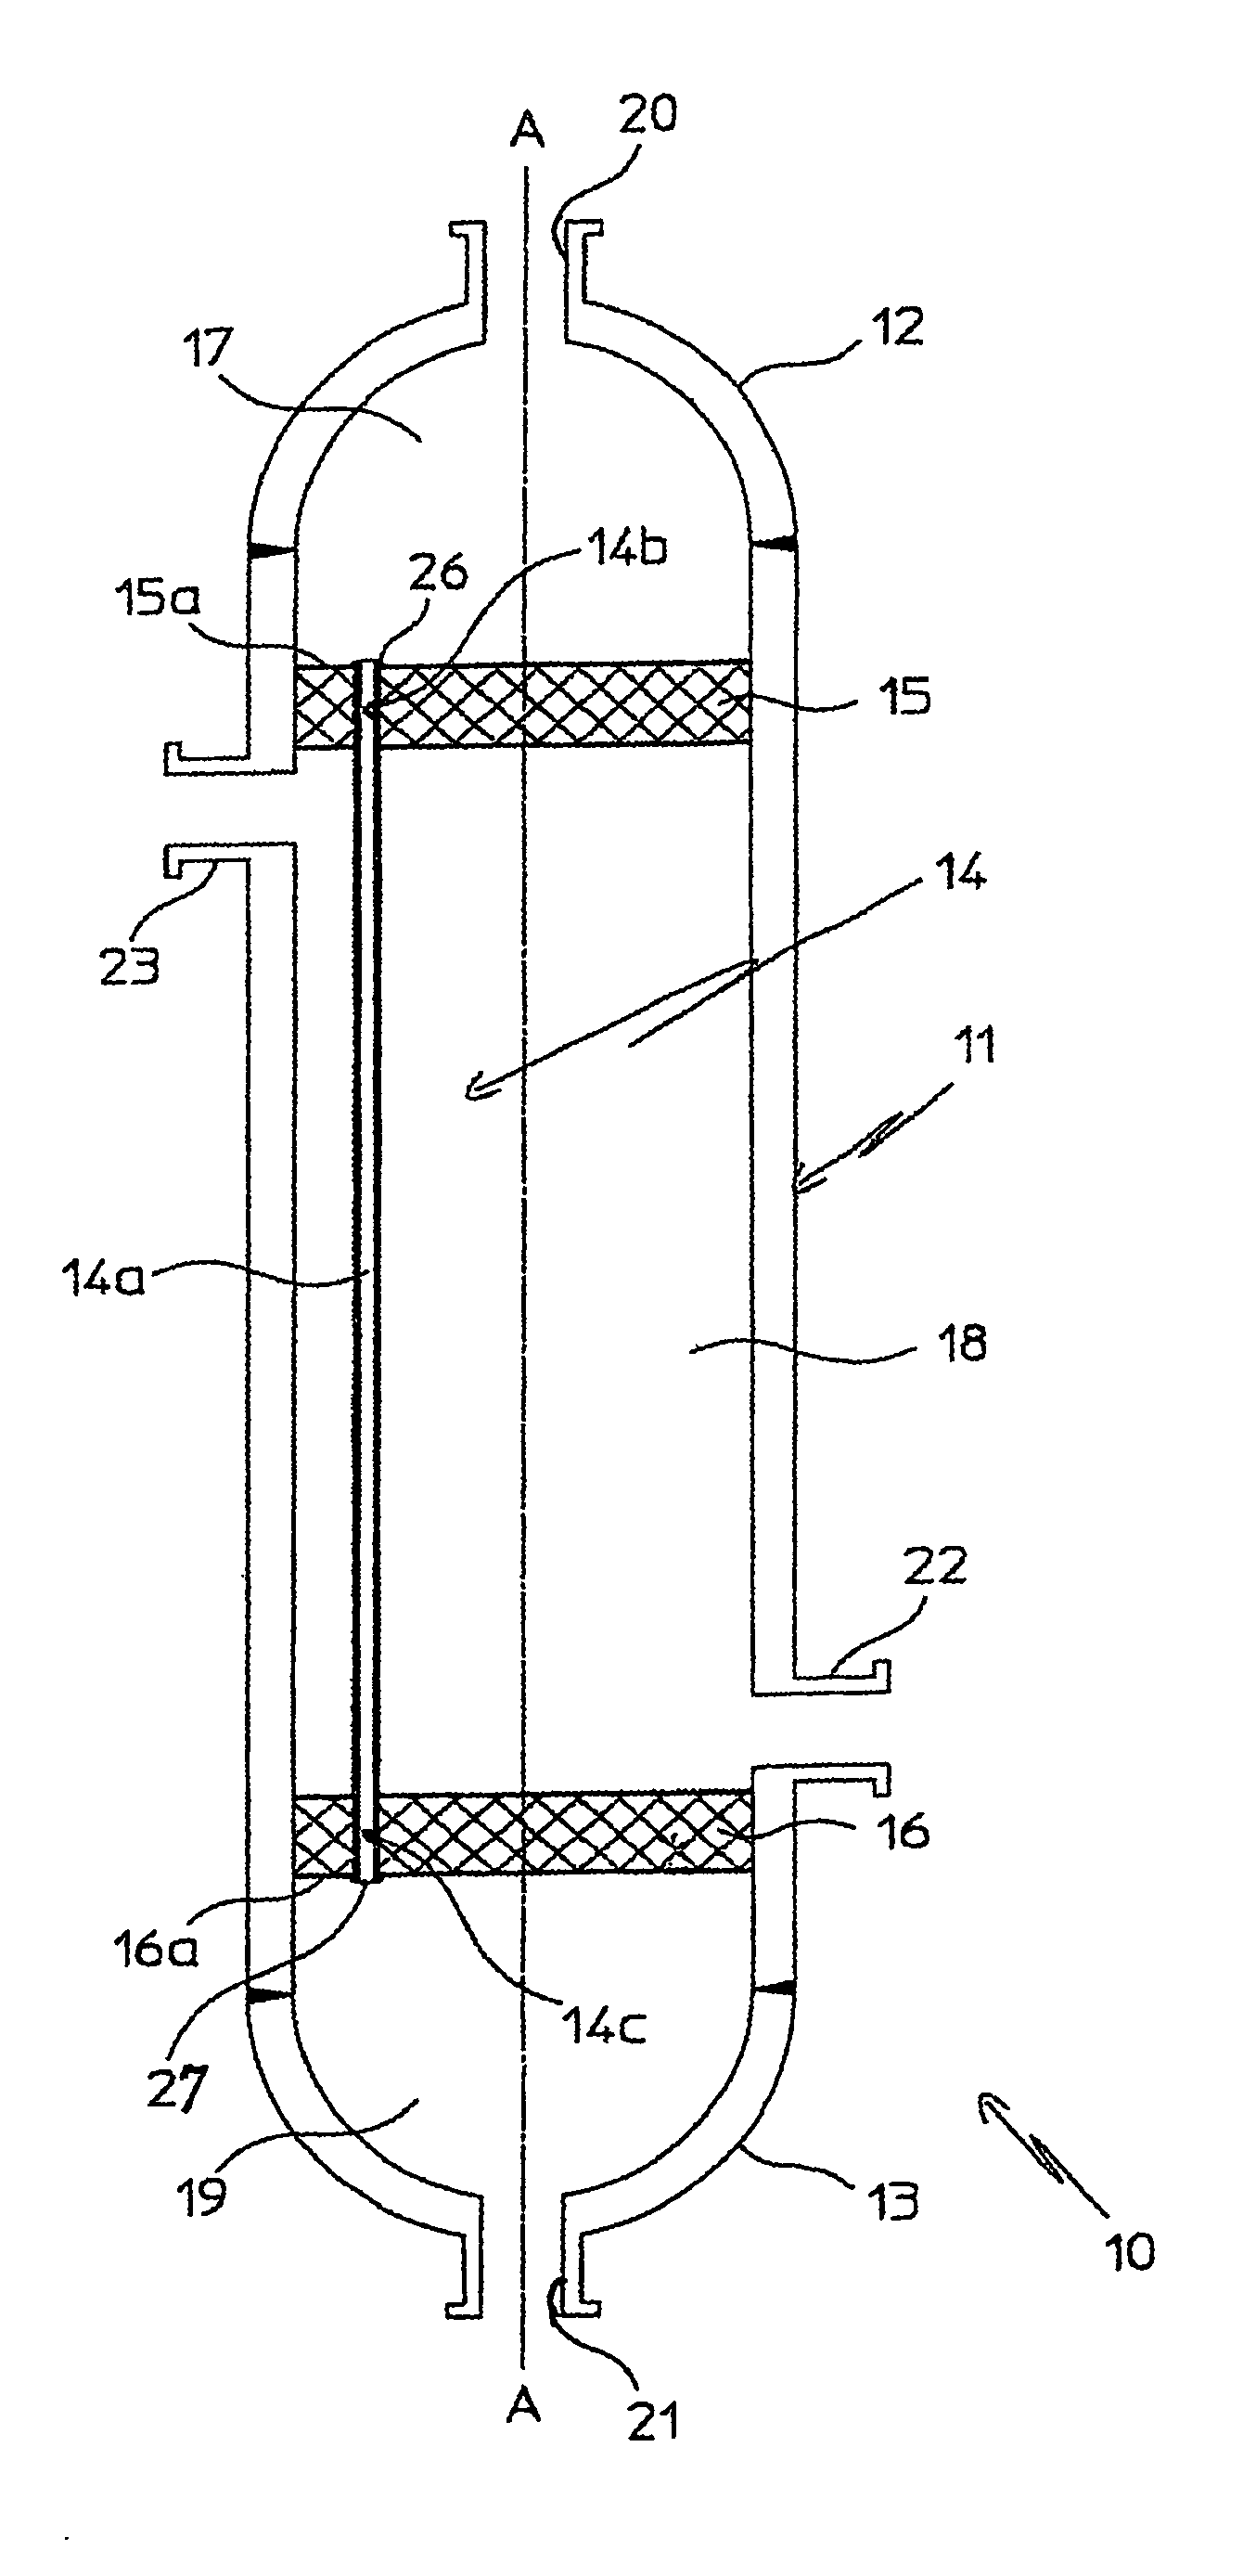 Apparatus for Processing Highly Corrosive Agents